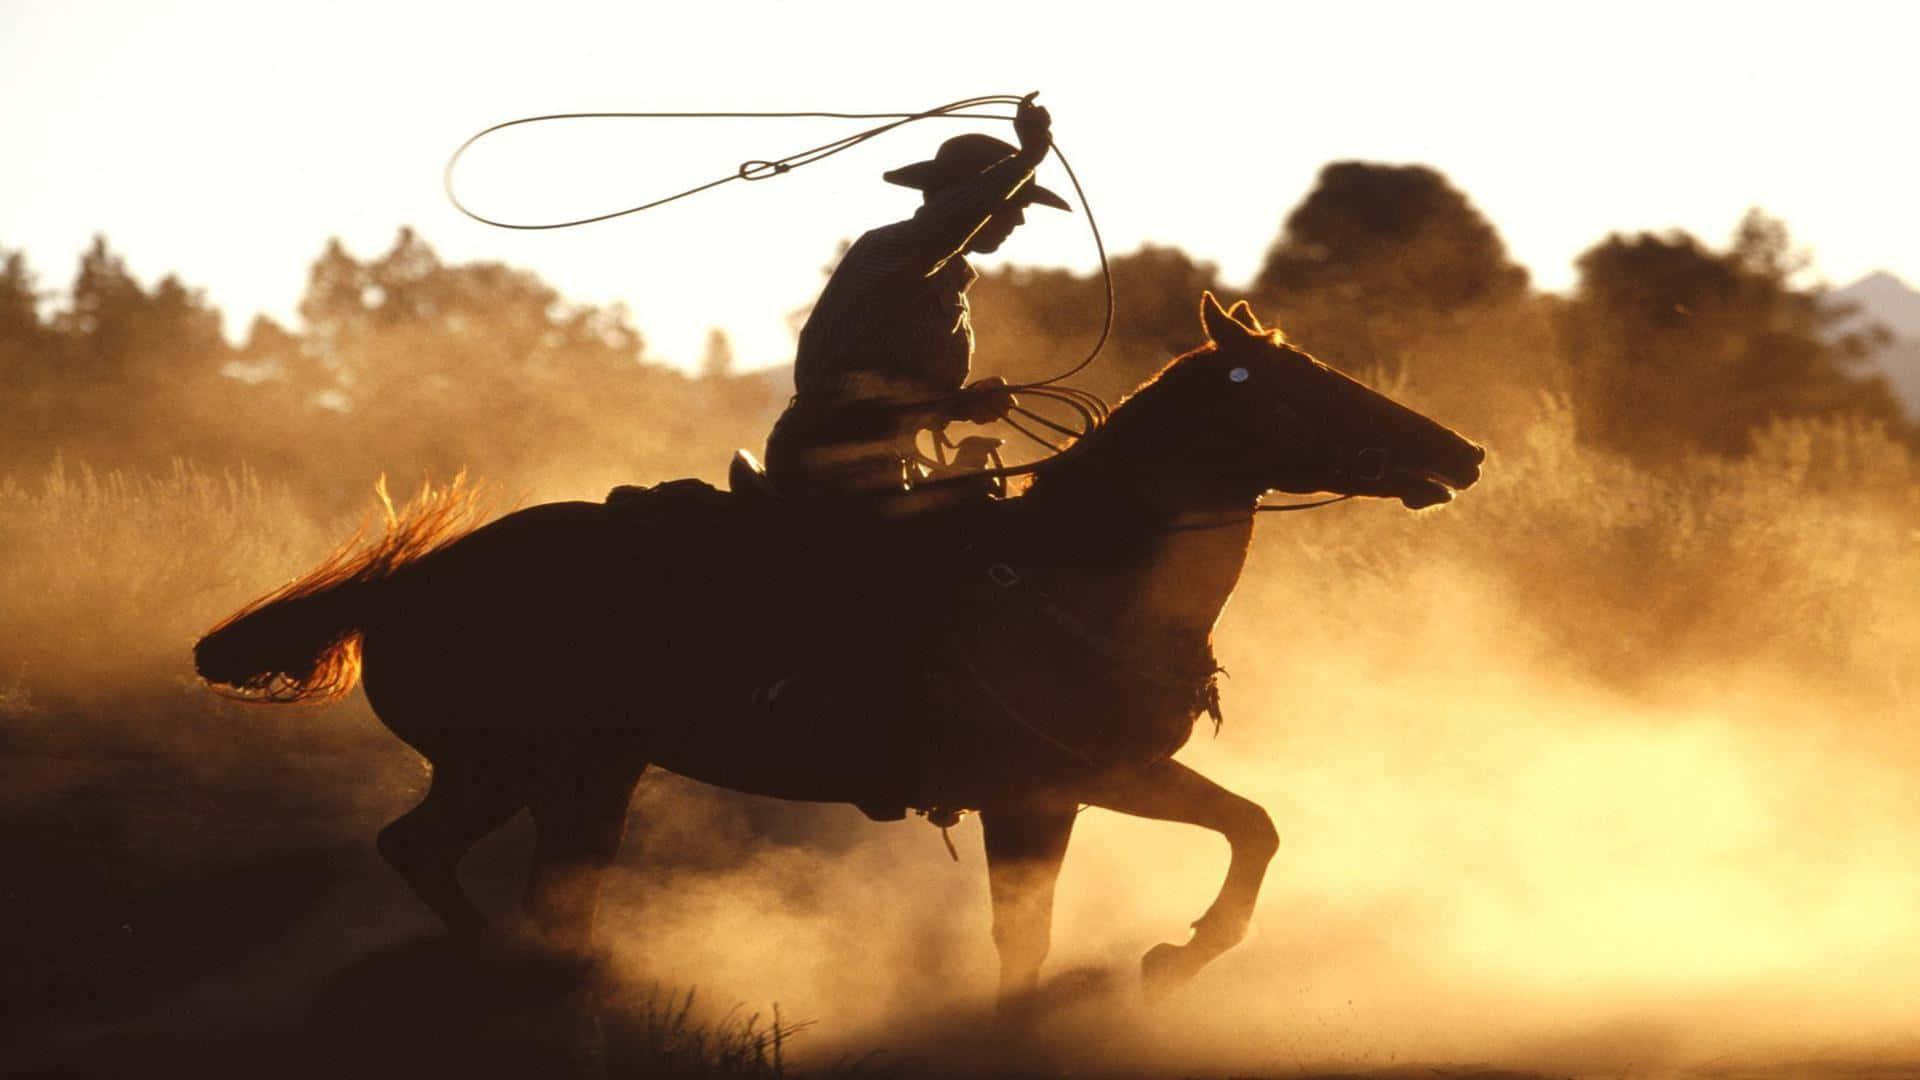 Saddle up and ride into the sunset.